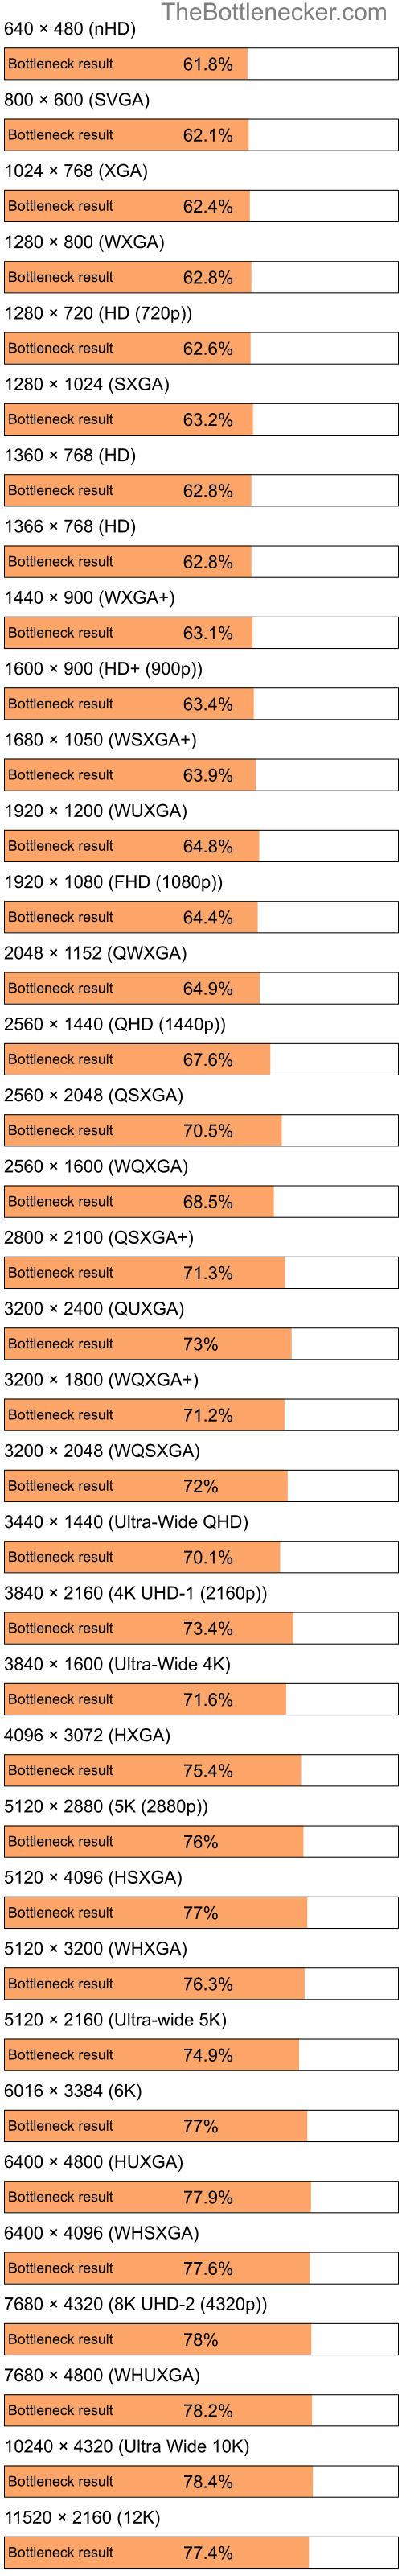 Bottleneck results by resolution for Intel Pentium 4 and NVIDIA GeForce 8600M GS in Processor Intense Tasks